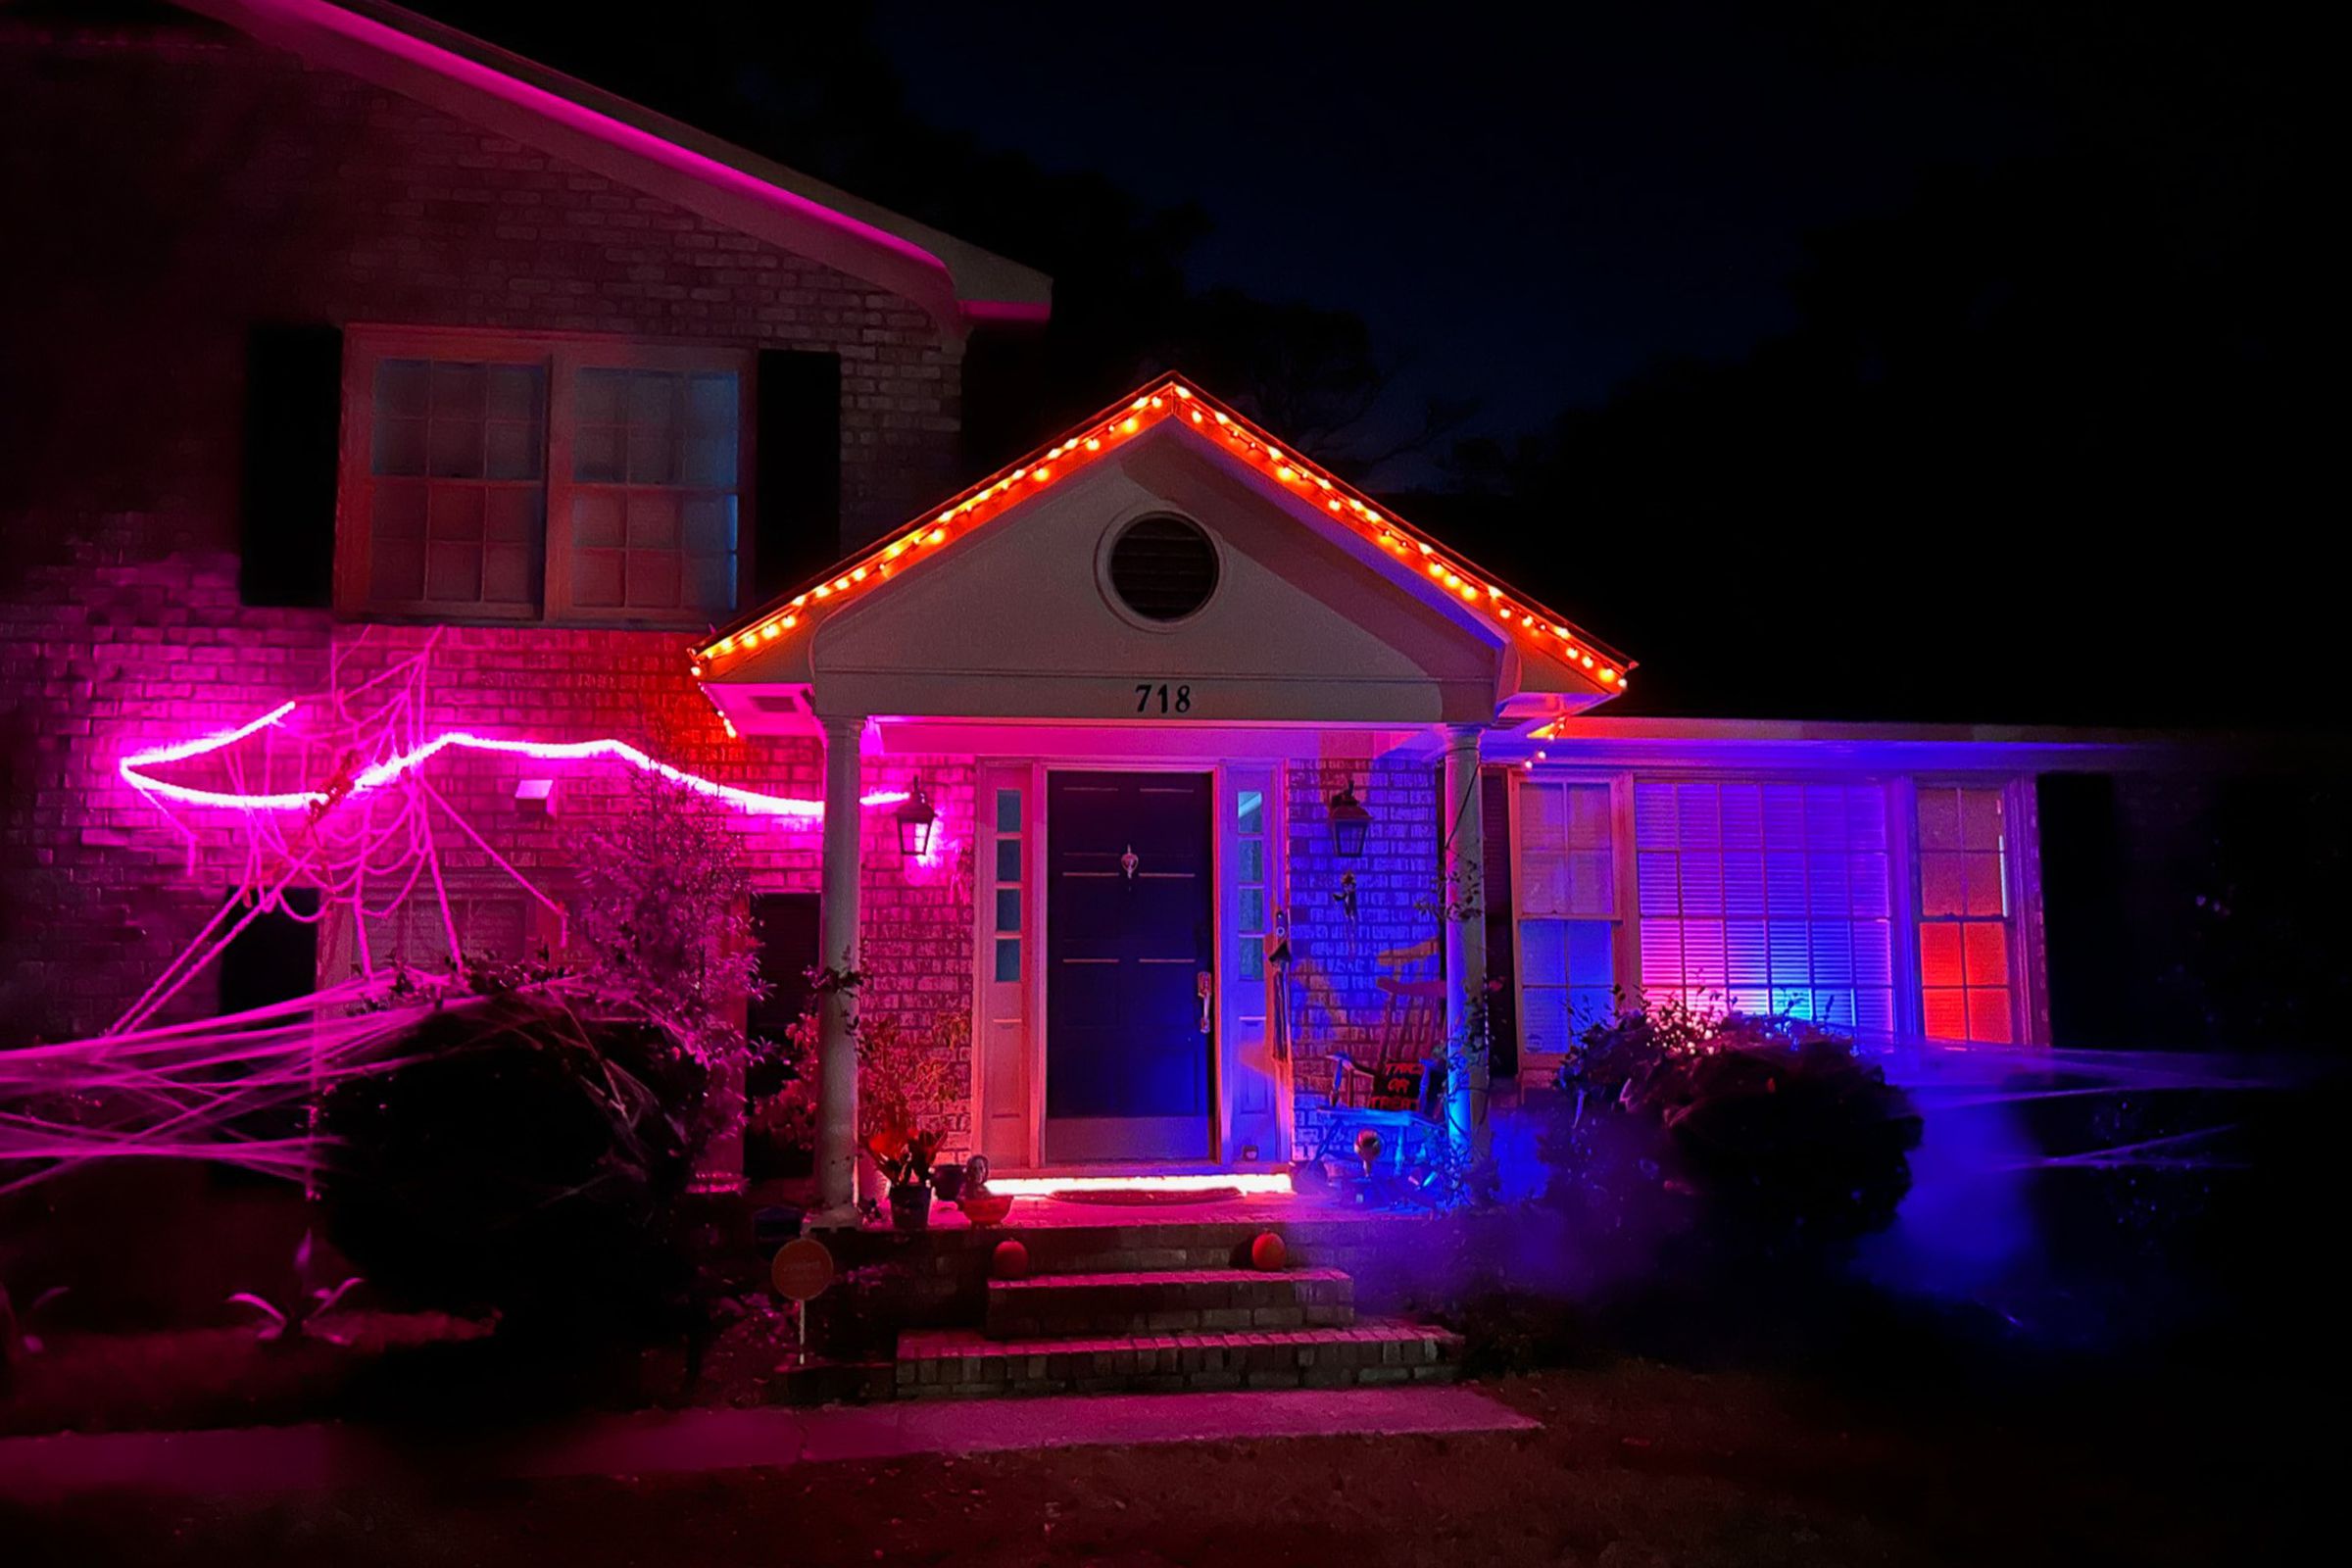 A house with multi-colored, spooky lighting